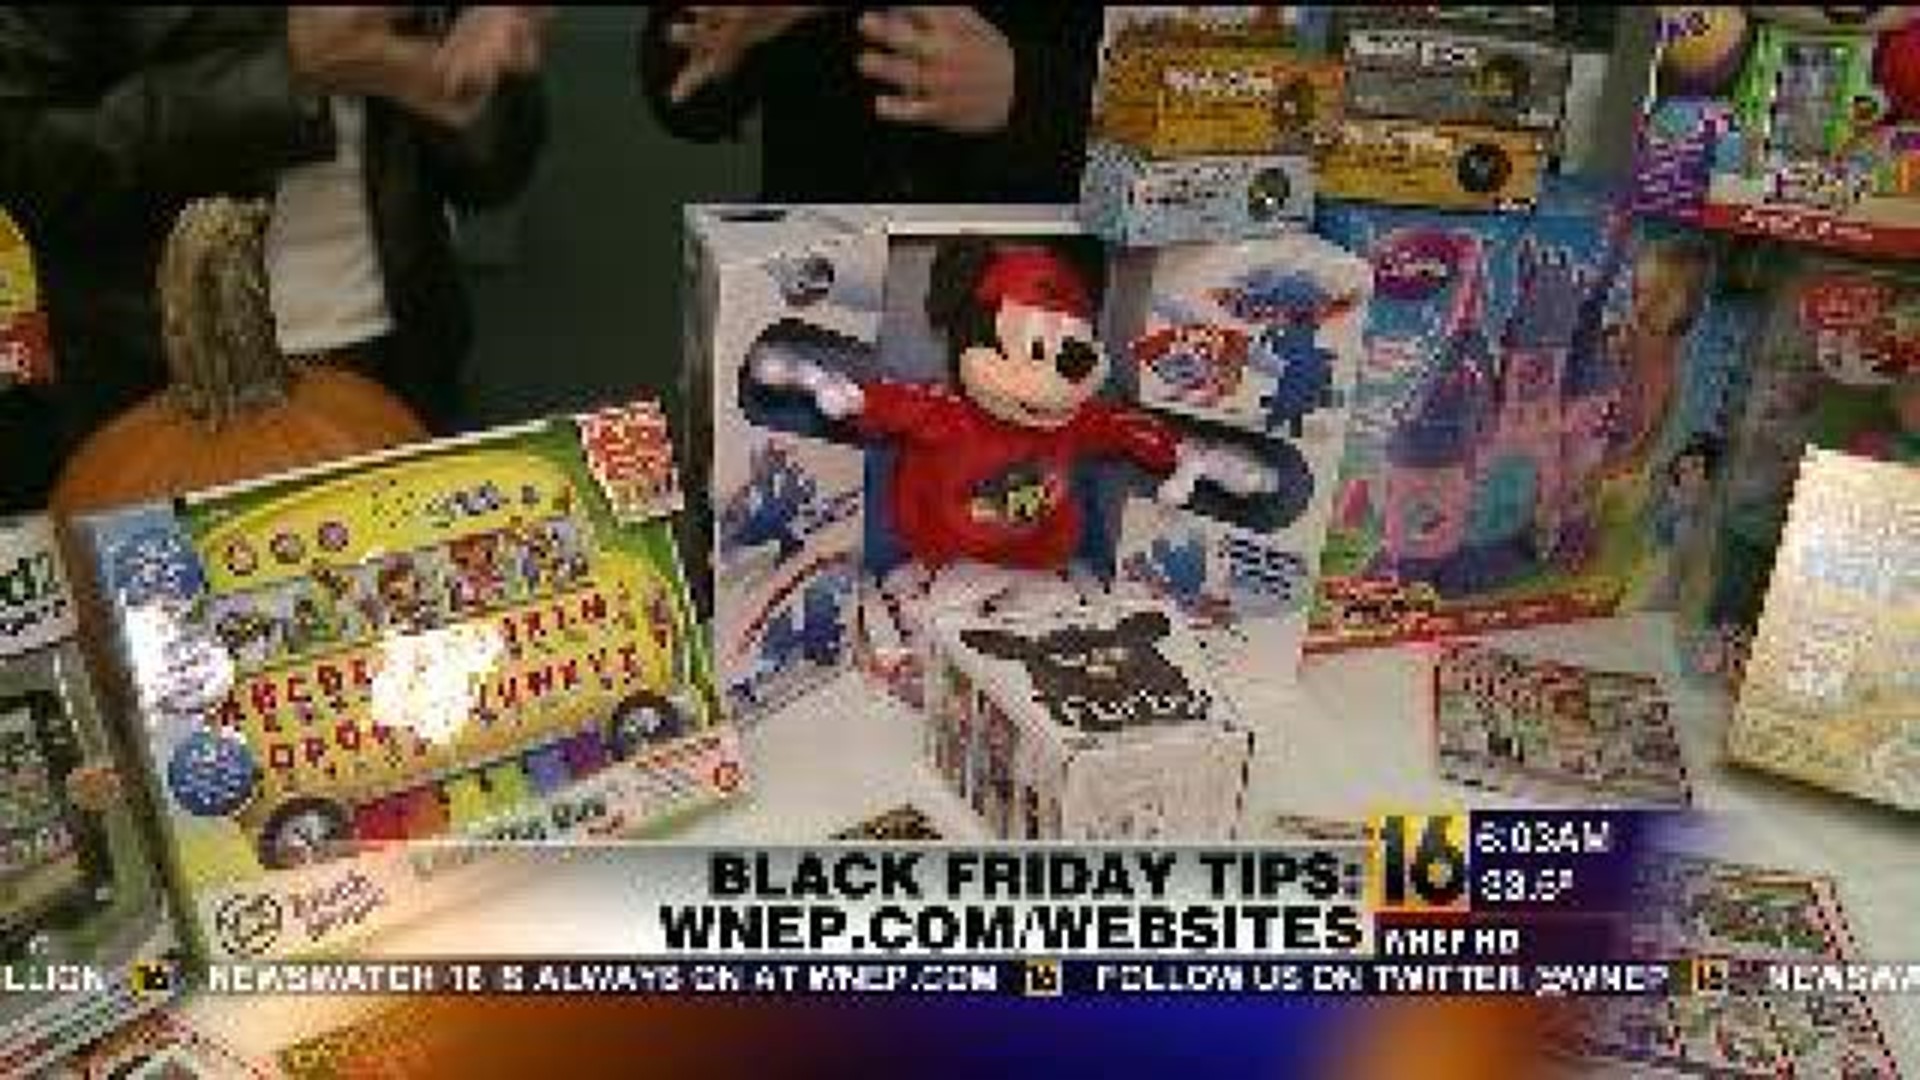 Black Friday Tips: Top Toys